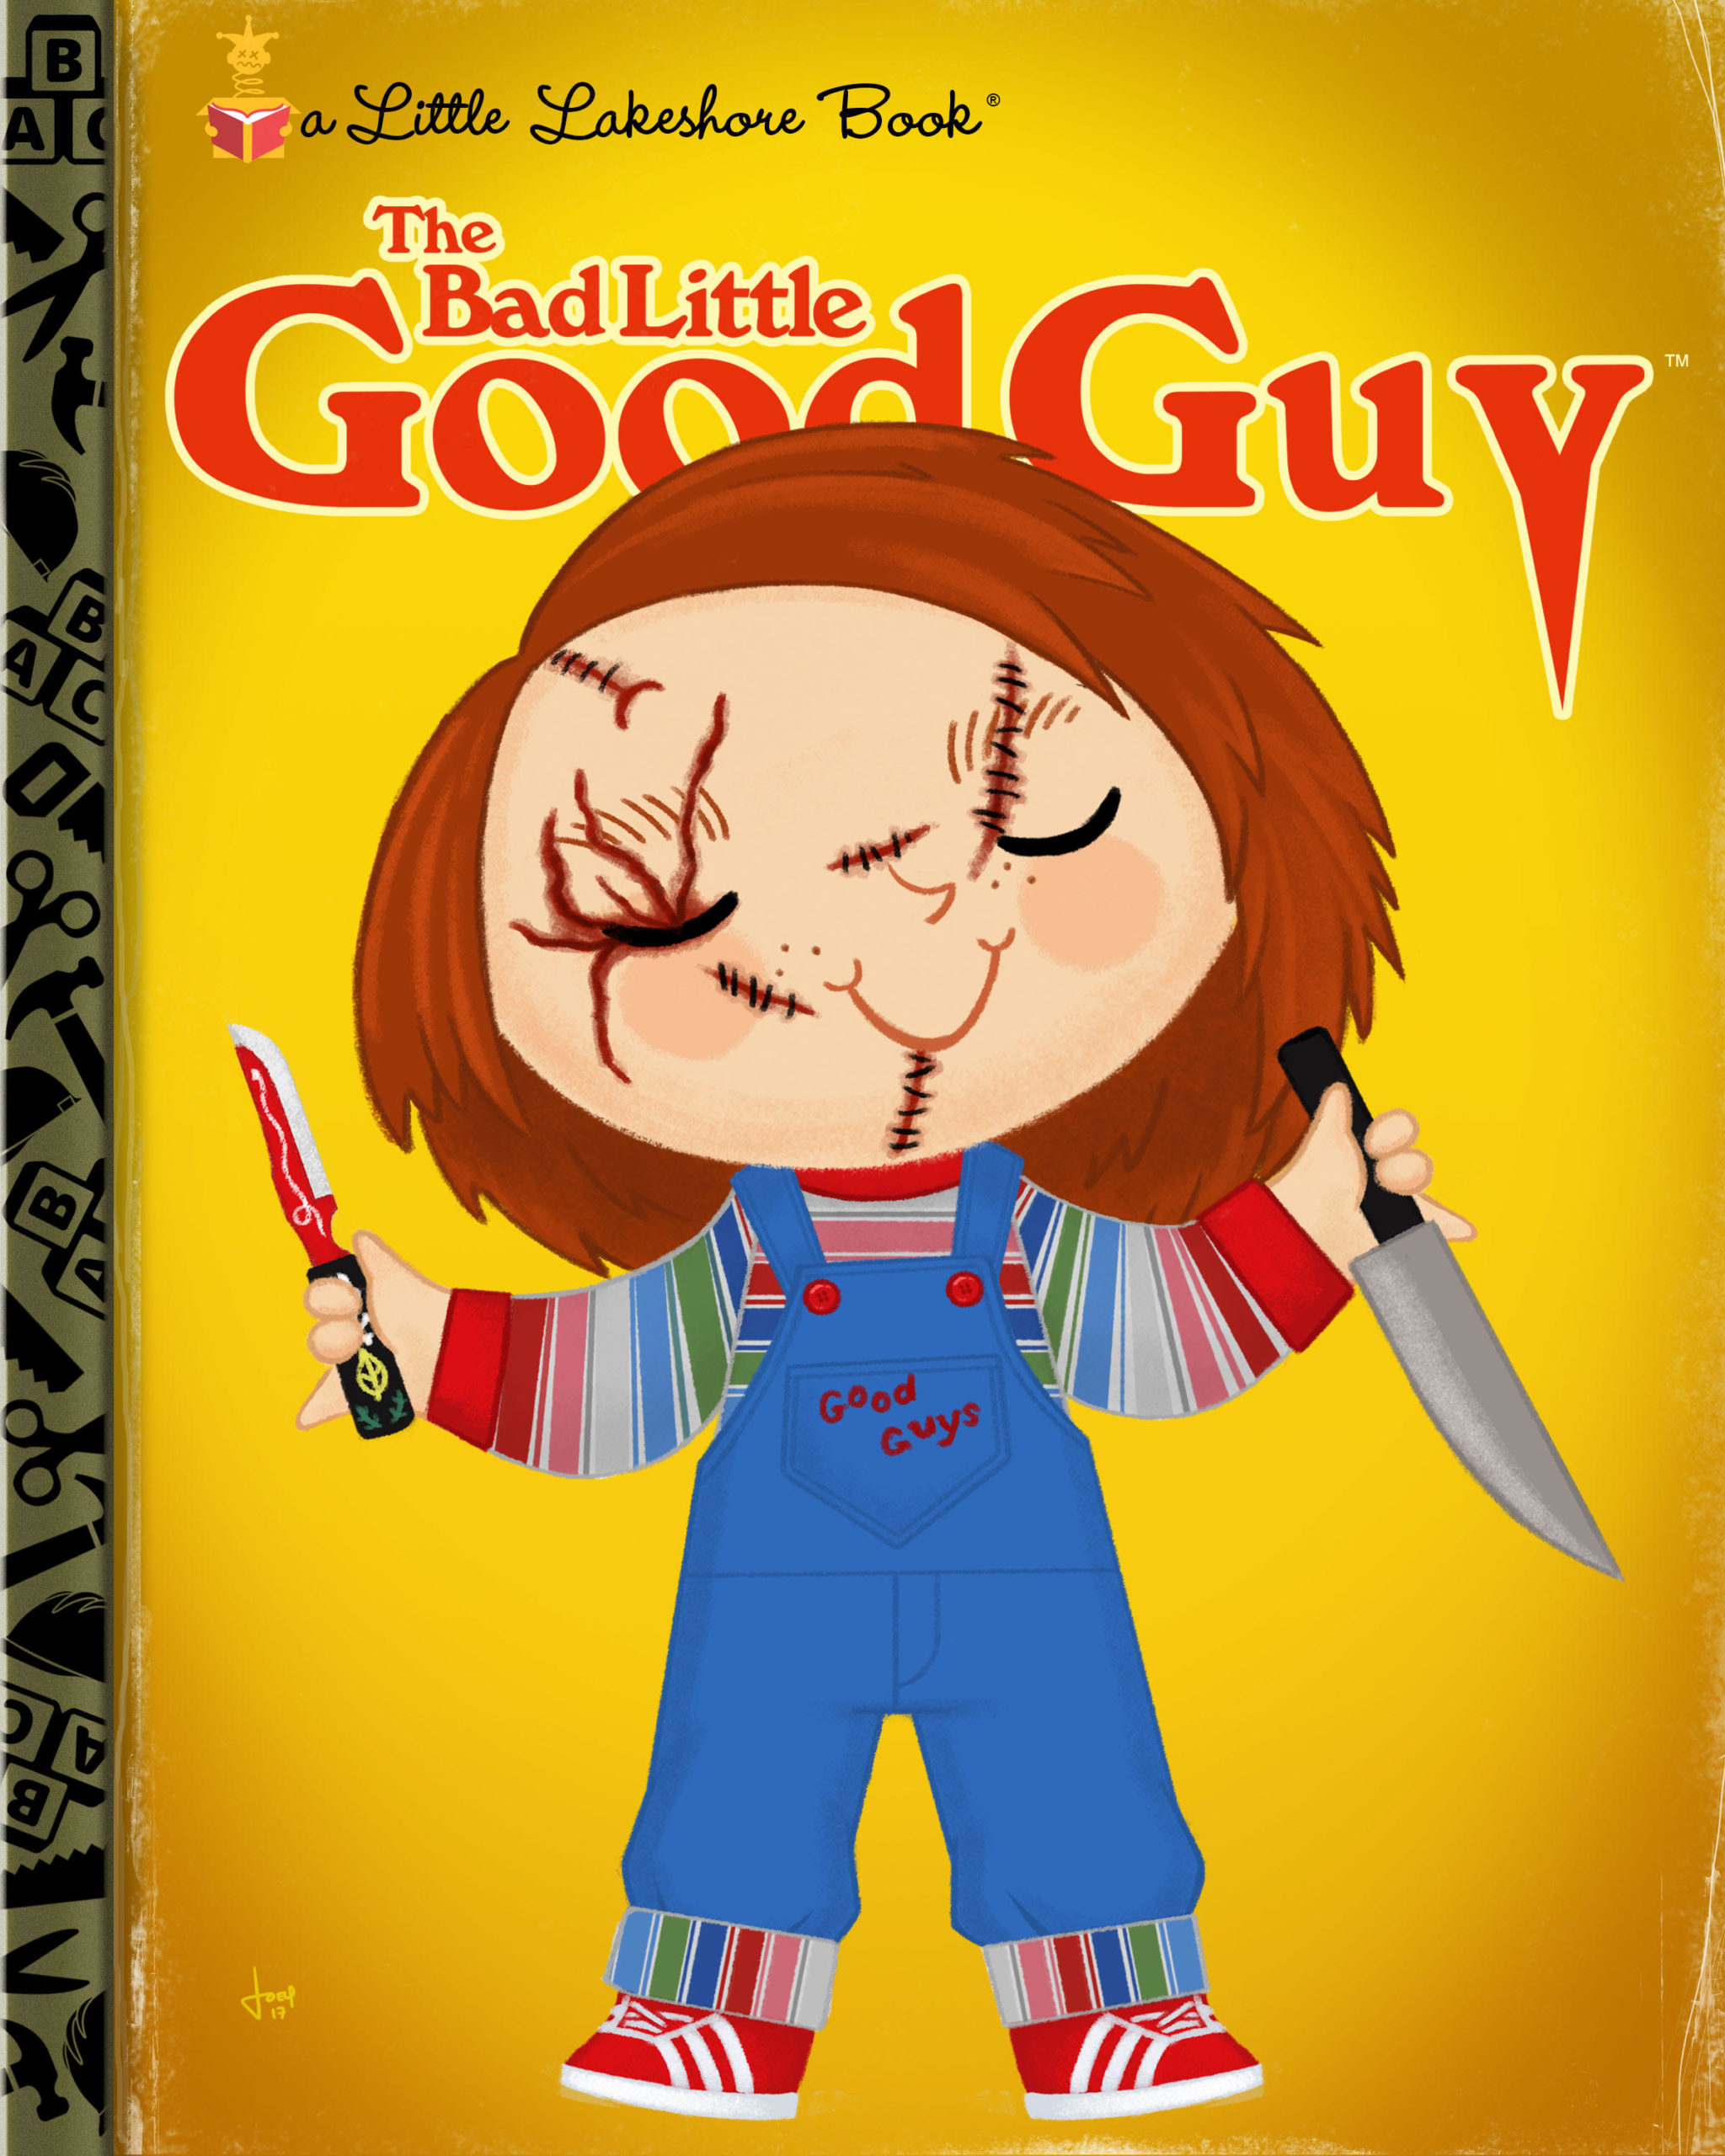 Once Again, Your Favourite Pop Culture Properties Have Been Turned Into Kids’ Book Covers